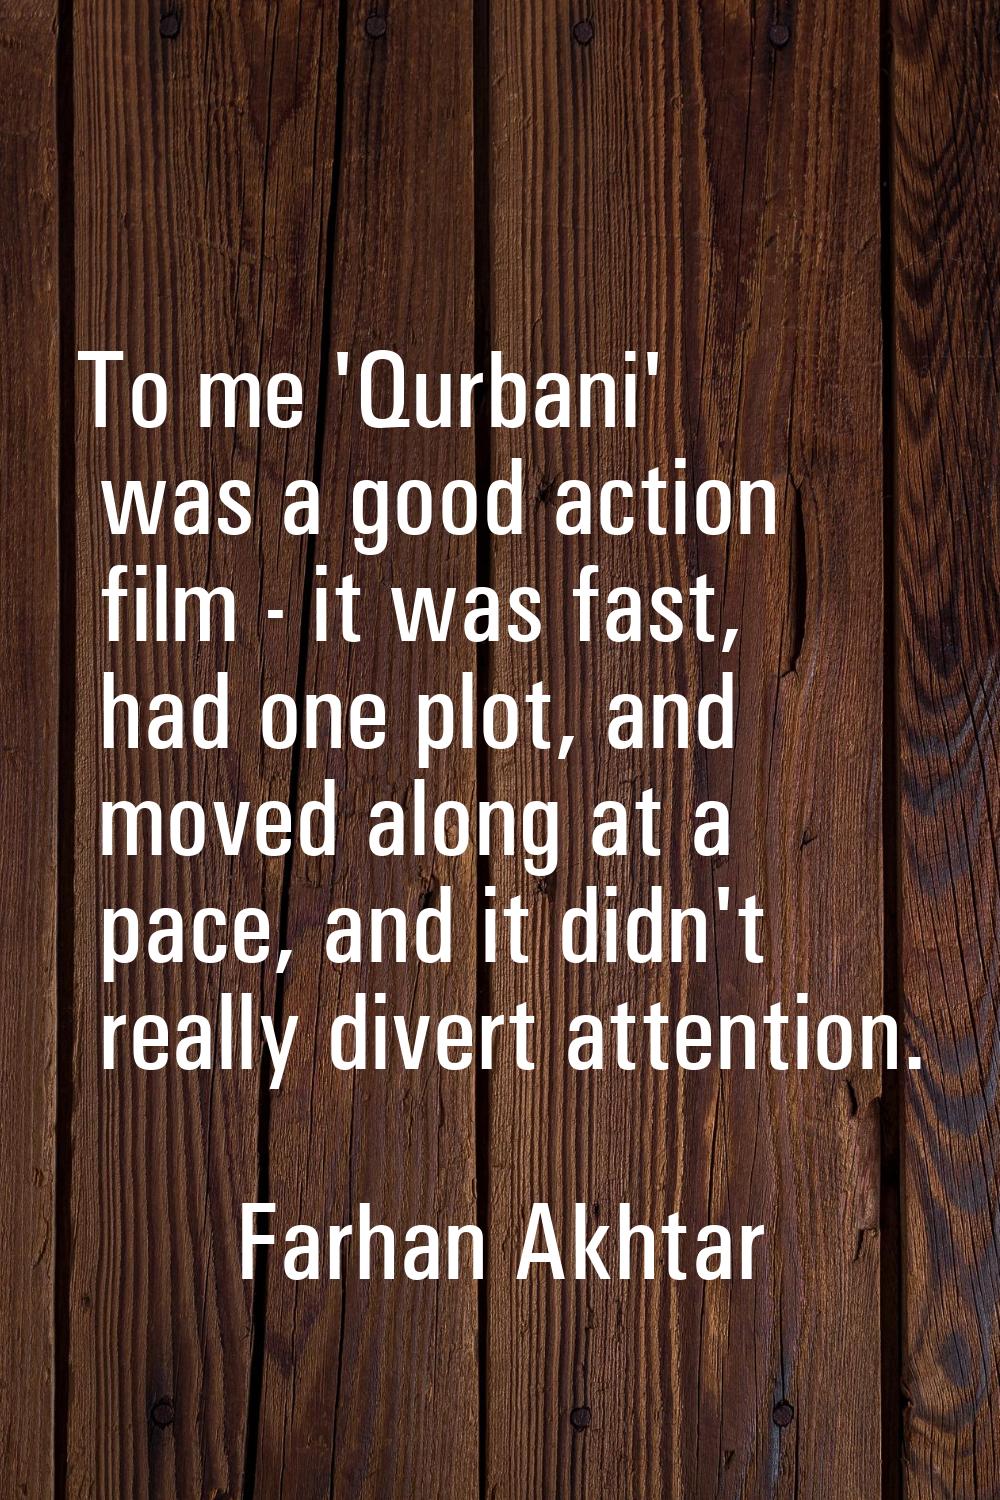 To me 'Qurbani' was a good action film - it was fast, had one plot, and moved along at a pace, and 